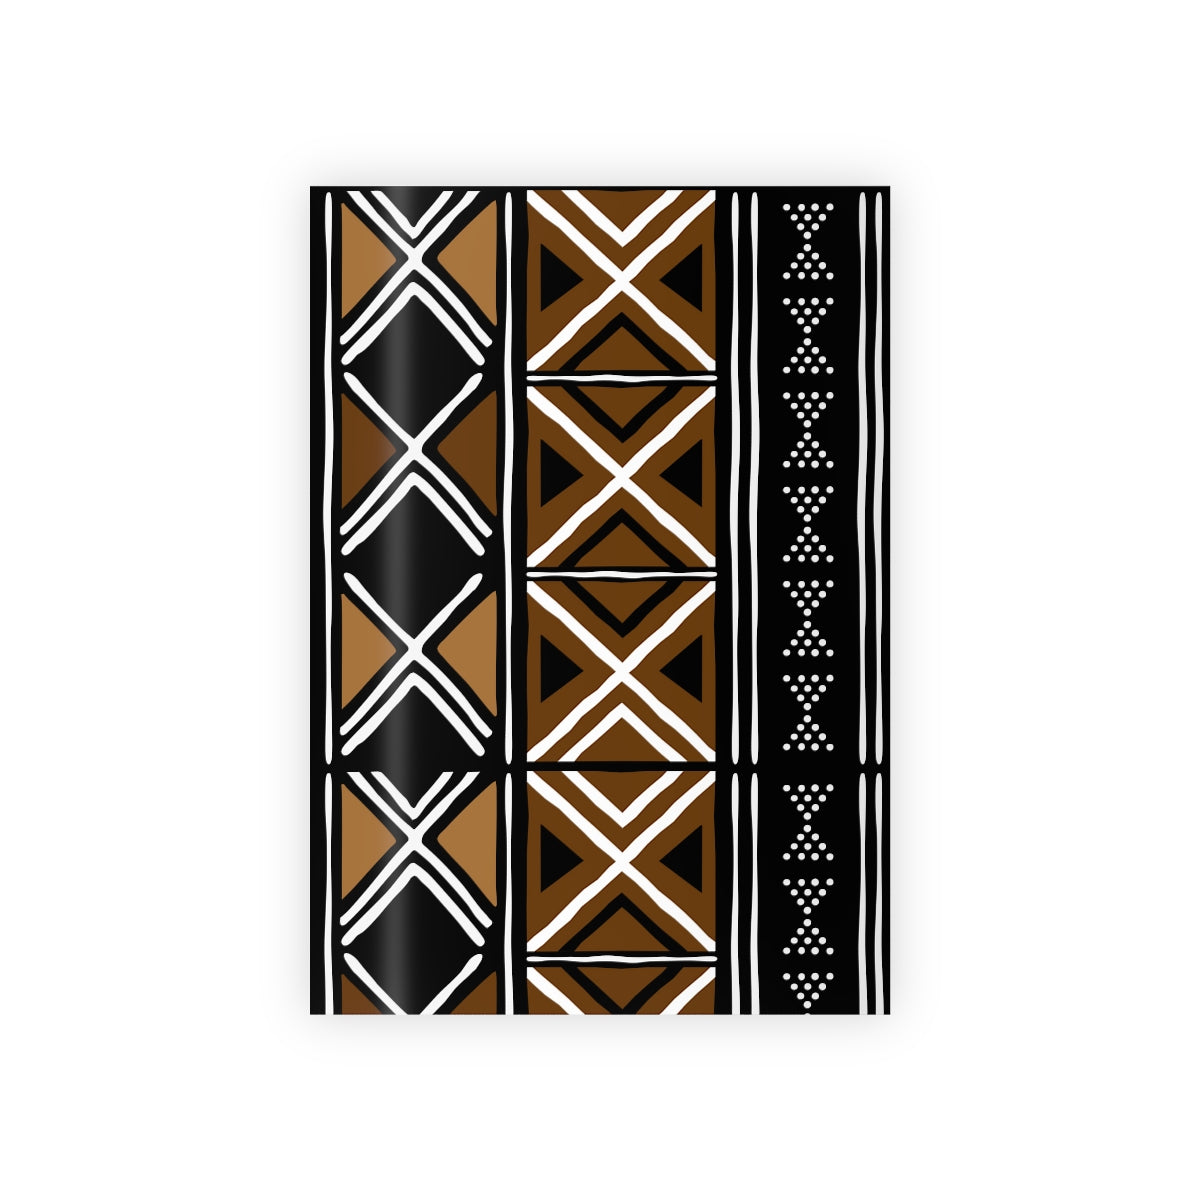 Dark Brown Mudcloth Wrapping Paper (79' /29')